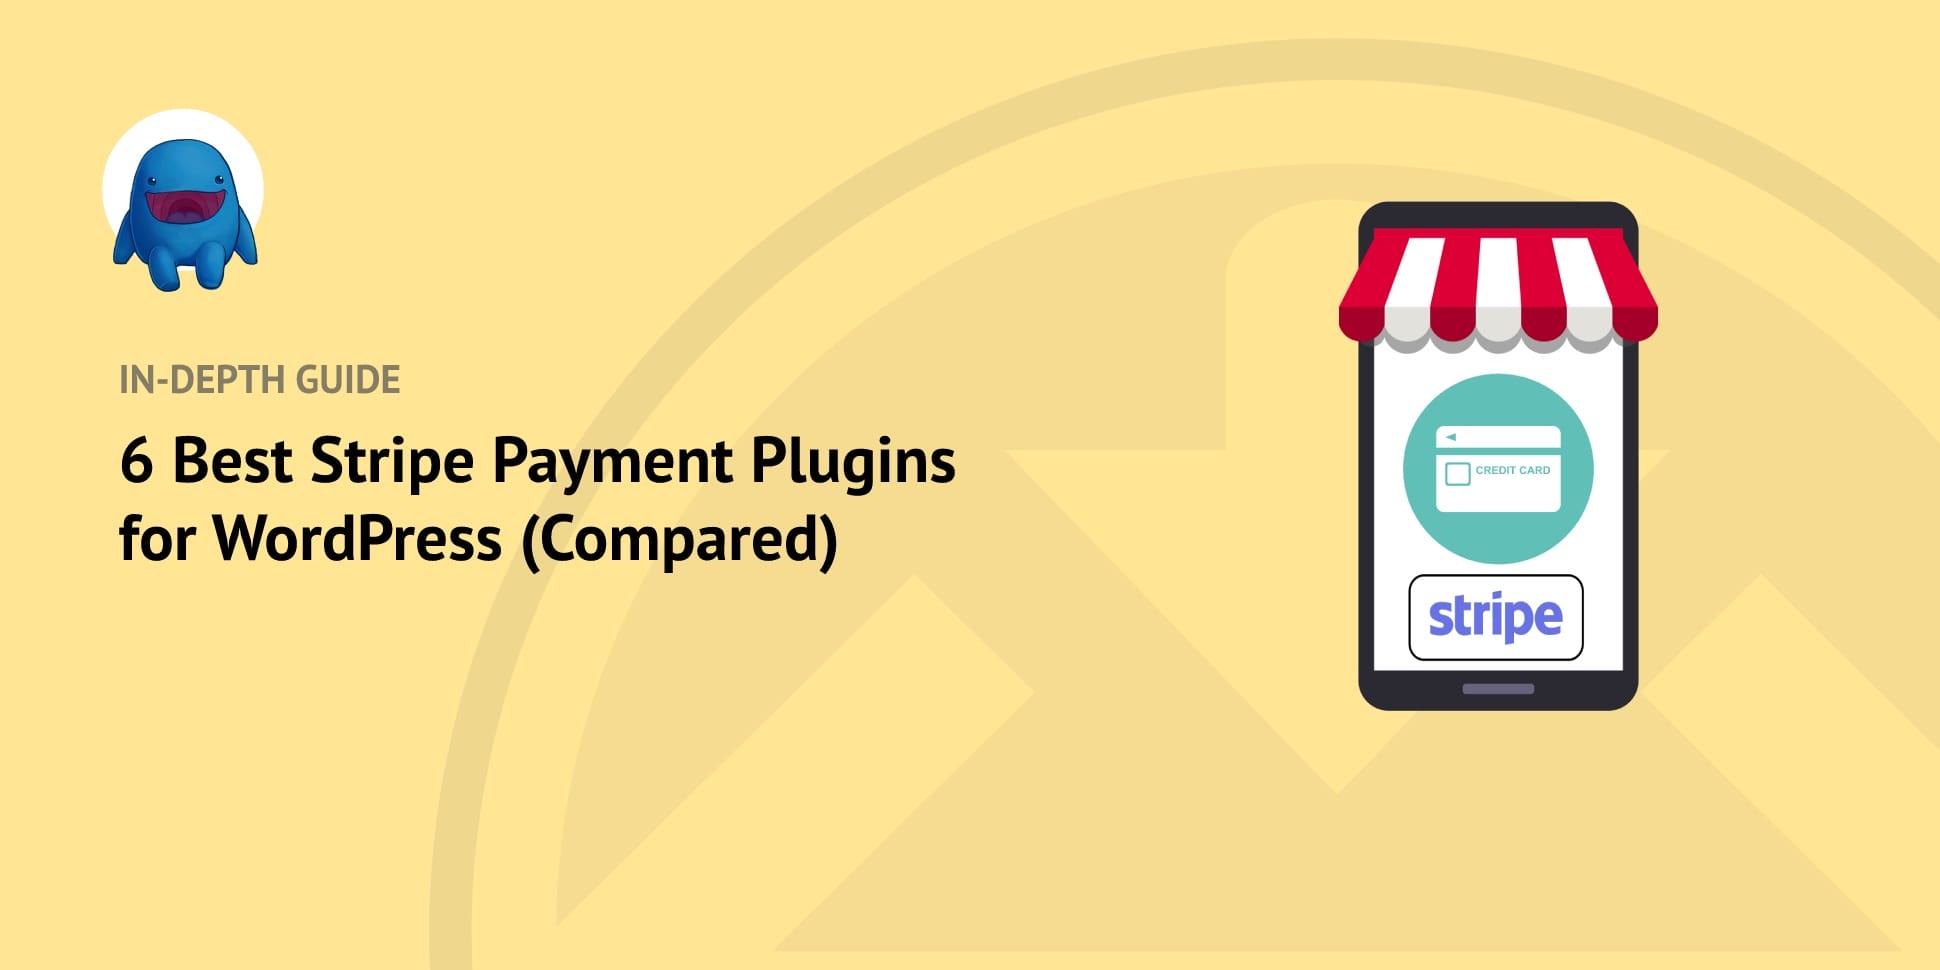 The Best Stripe Payment Plugins for WordPress